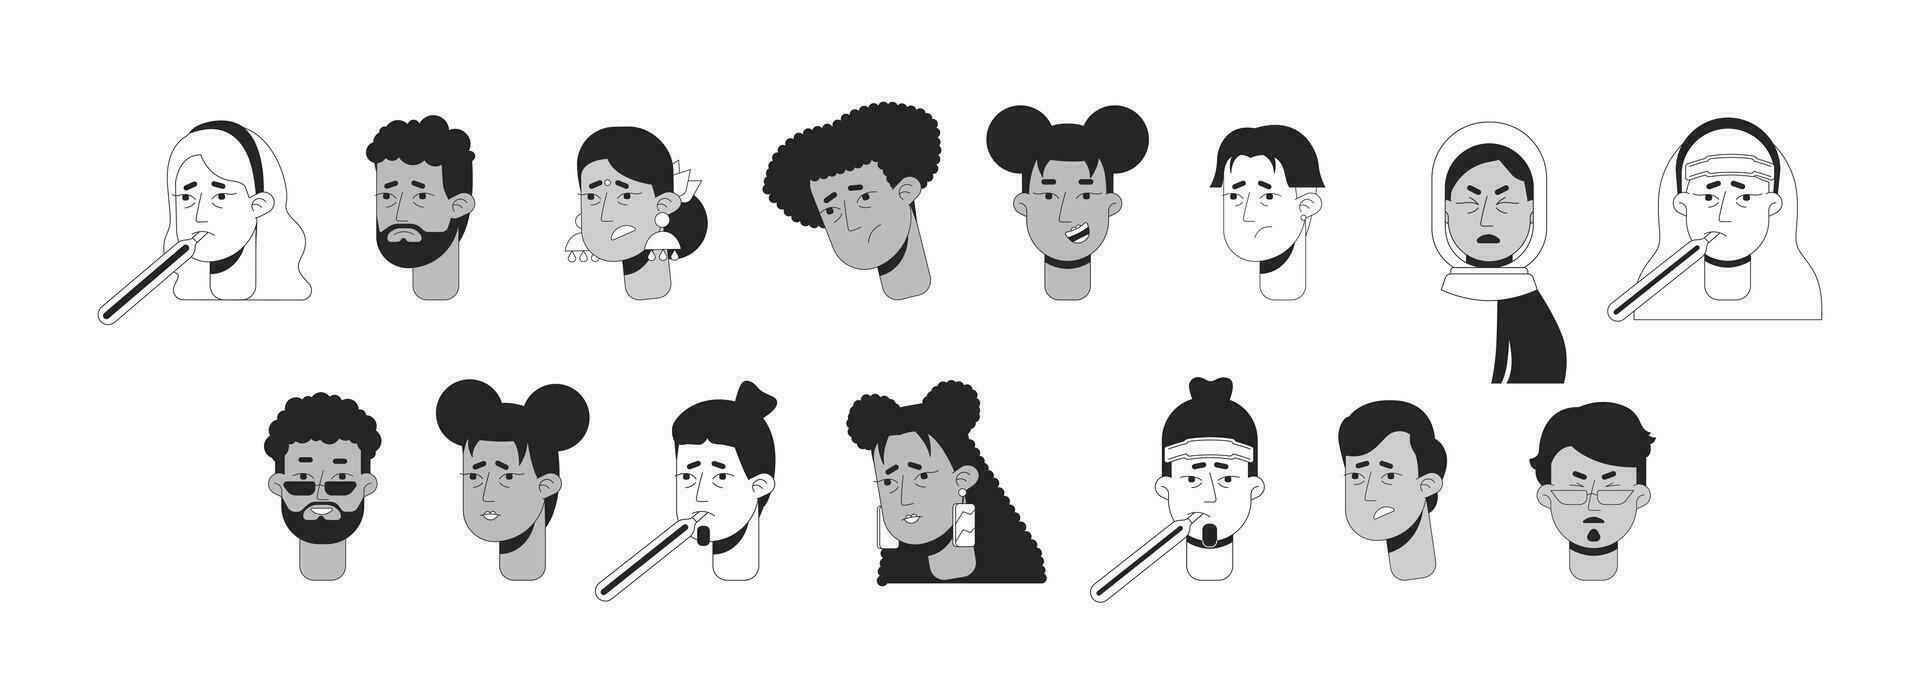 Feeling sick diverse black and white 2D vector avatars illustration bundle. Thermometer in mouth, aching women, men outline cartoon character faces isolated. Ill flat user profiles images collection